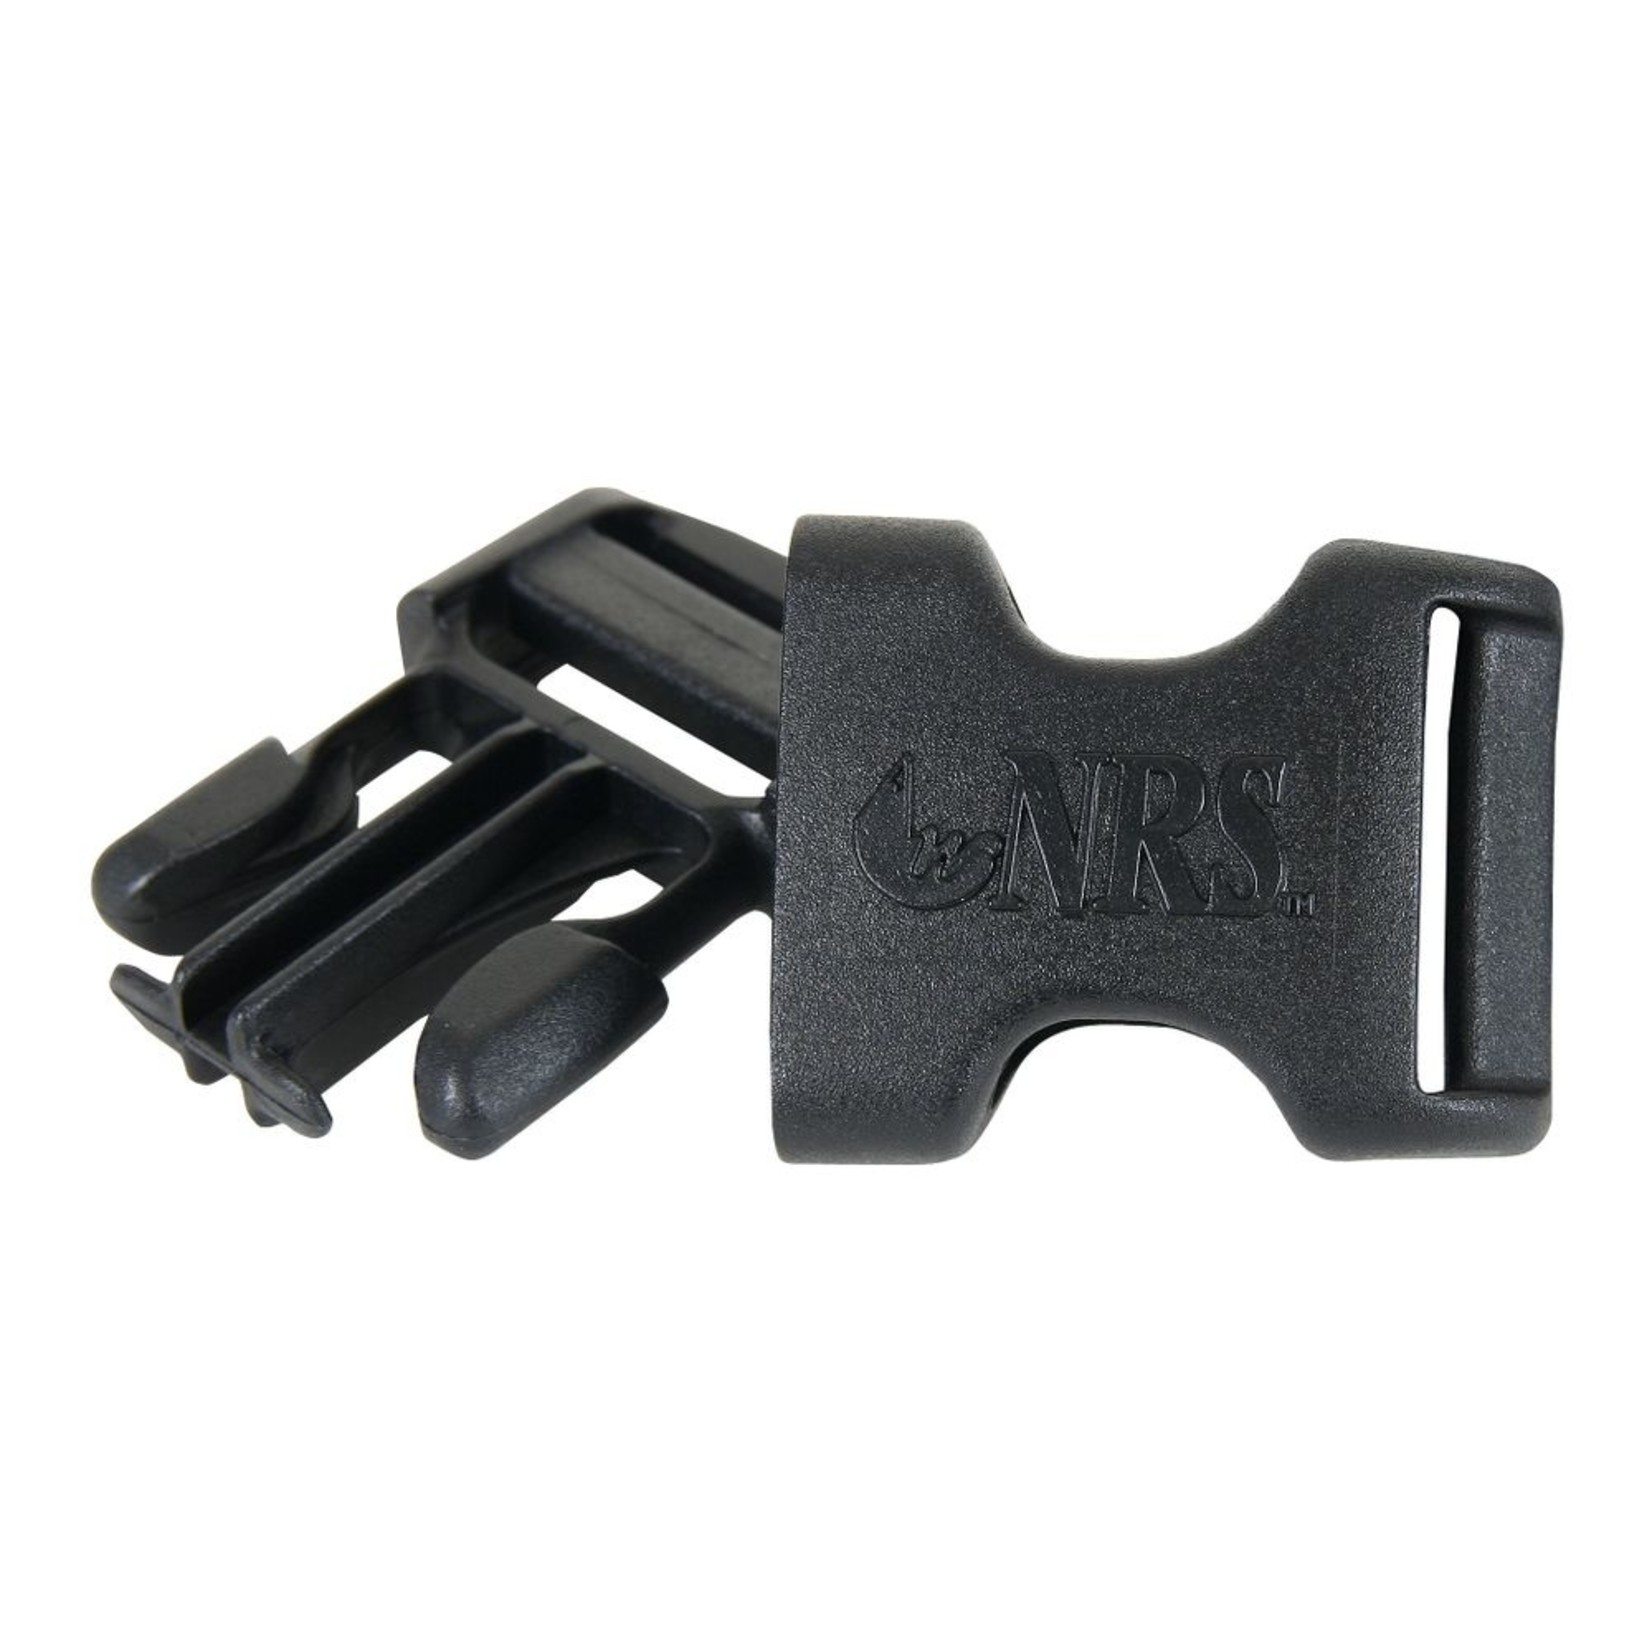 NRS NRS 1" Plastic Replacement Buckle